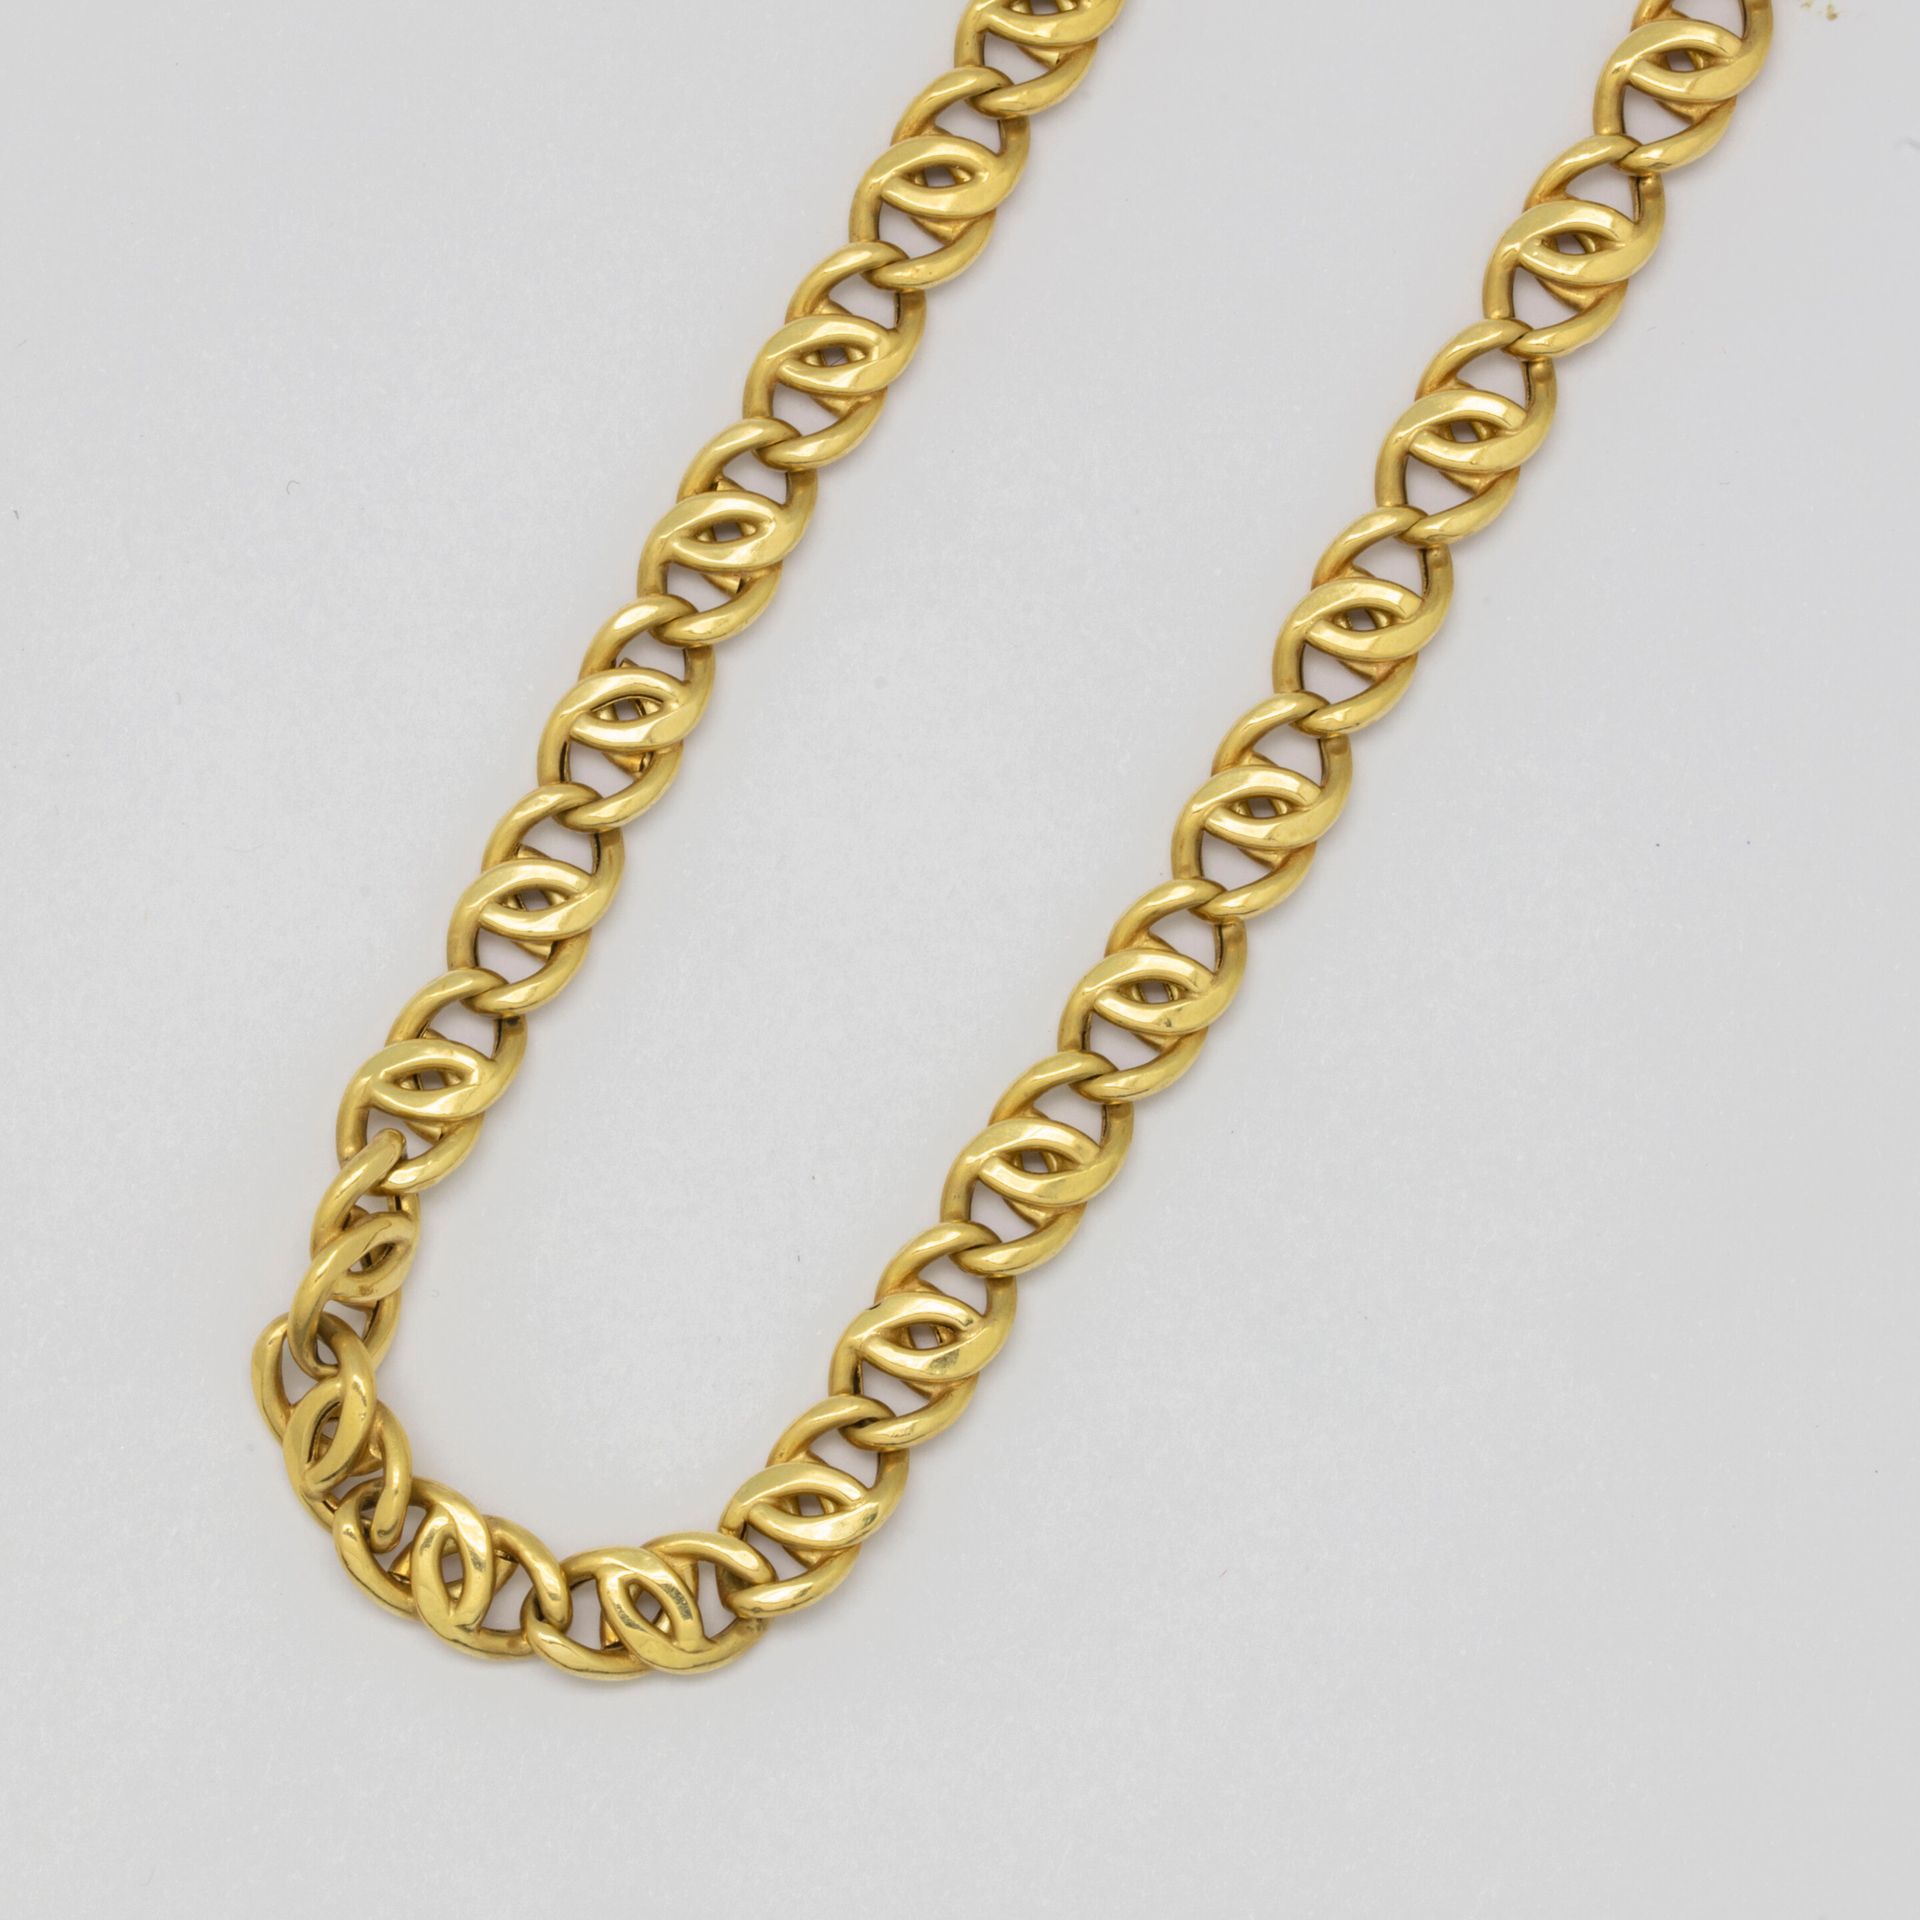 Null Collier en or jaune à gros maillons

Poids 20,8 g